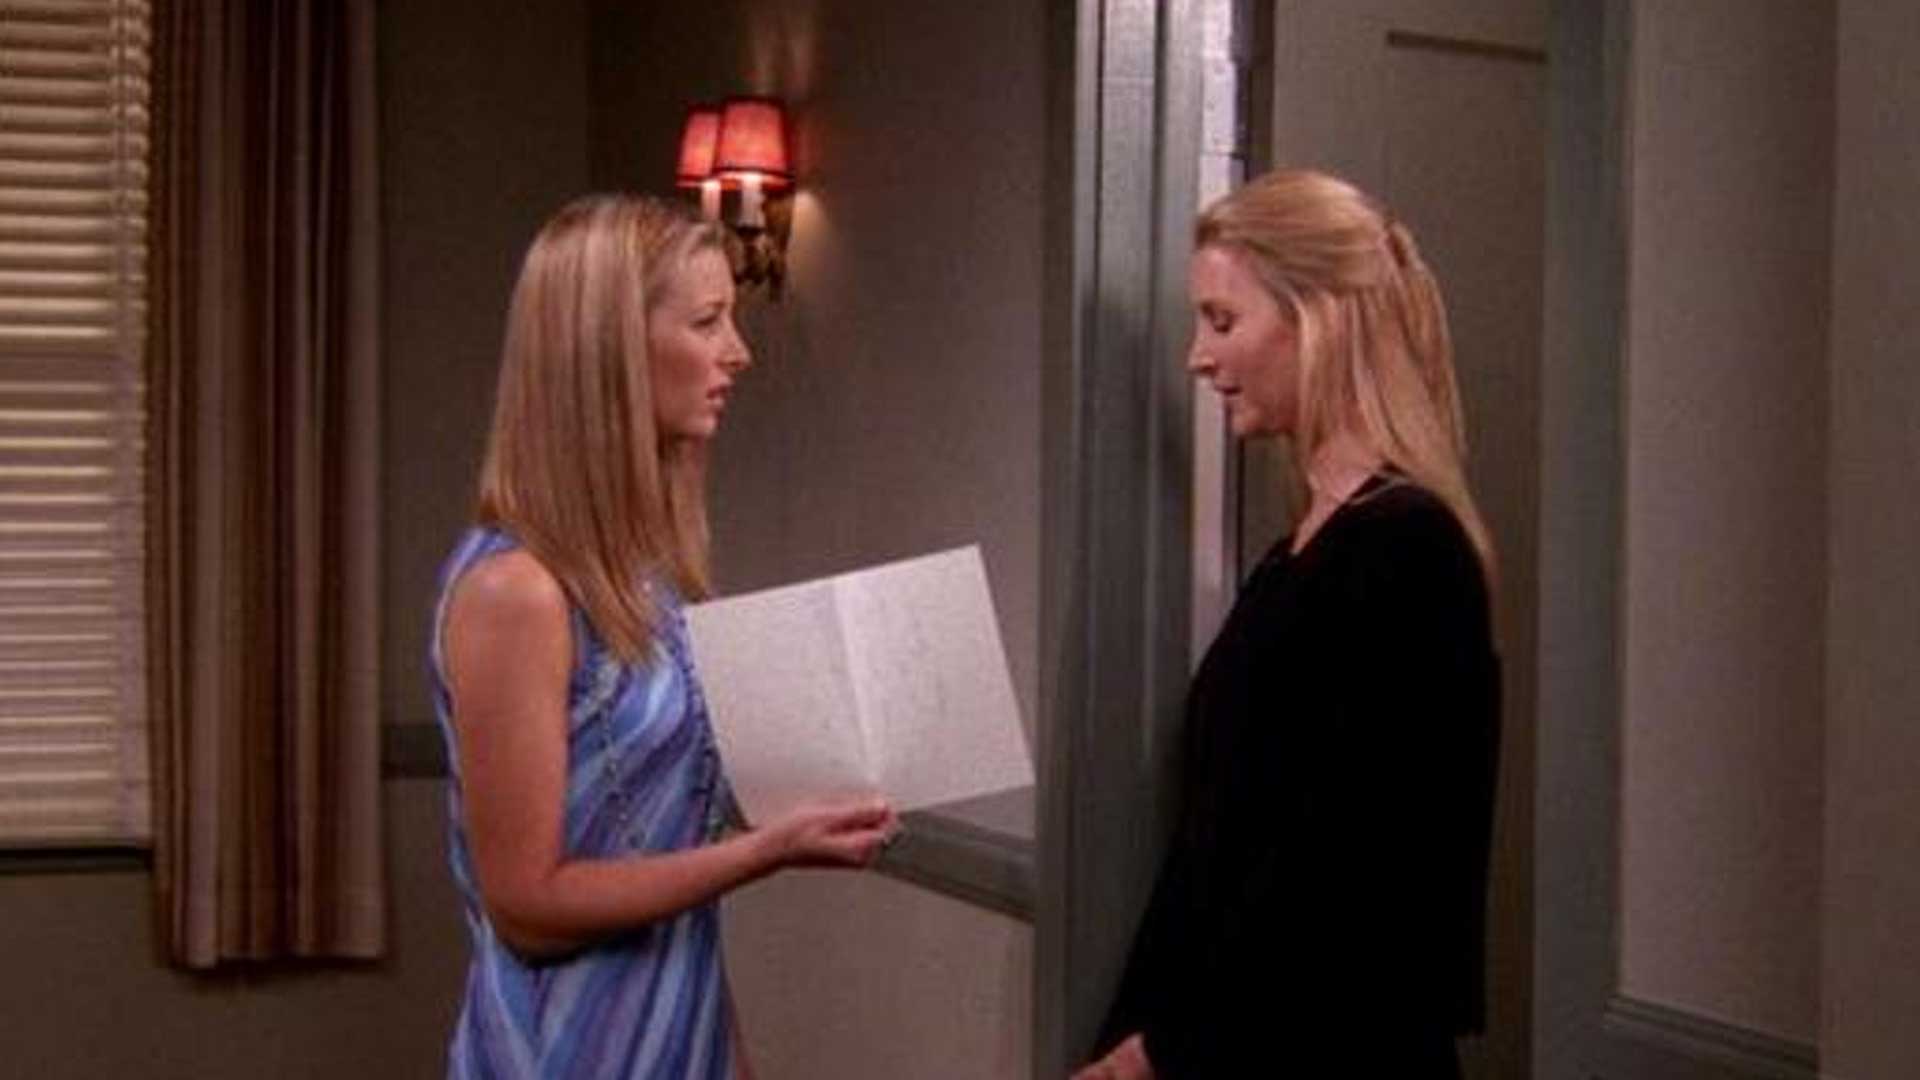 Phoebe and her twin sister